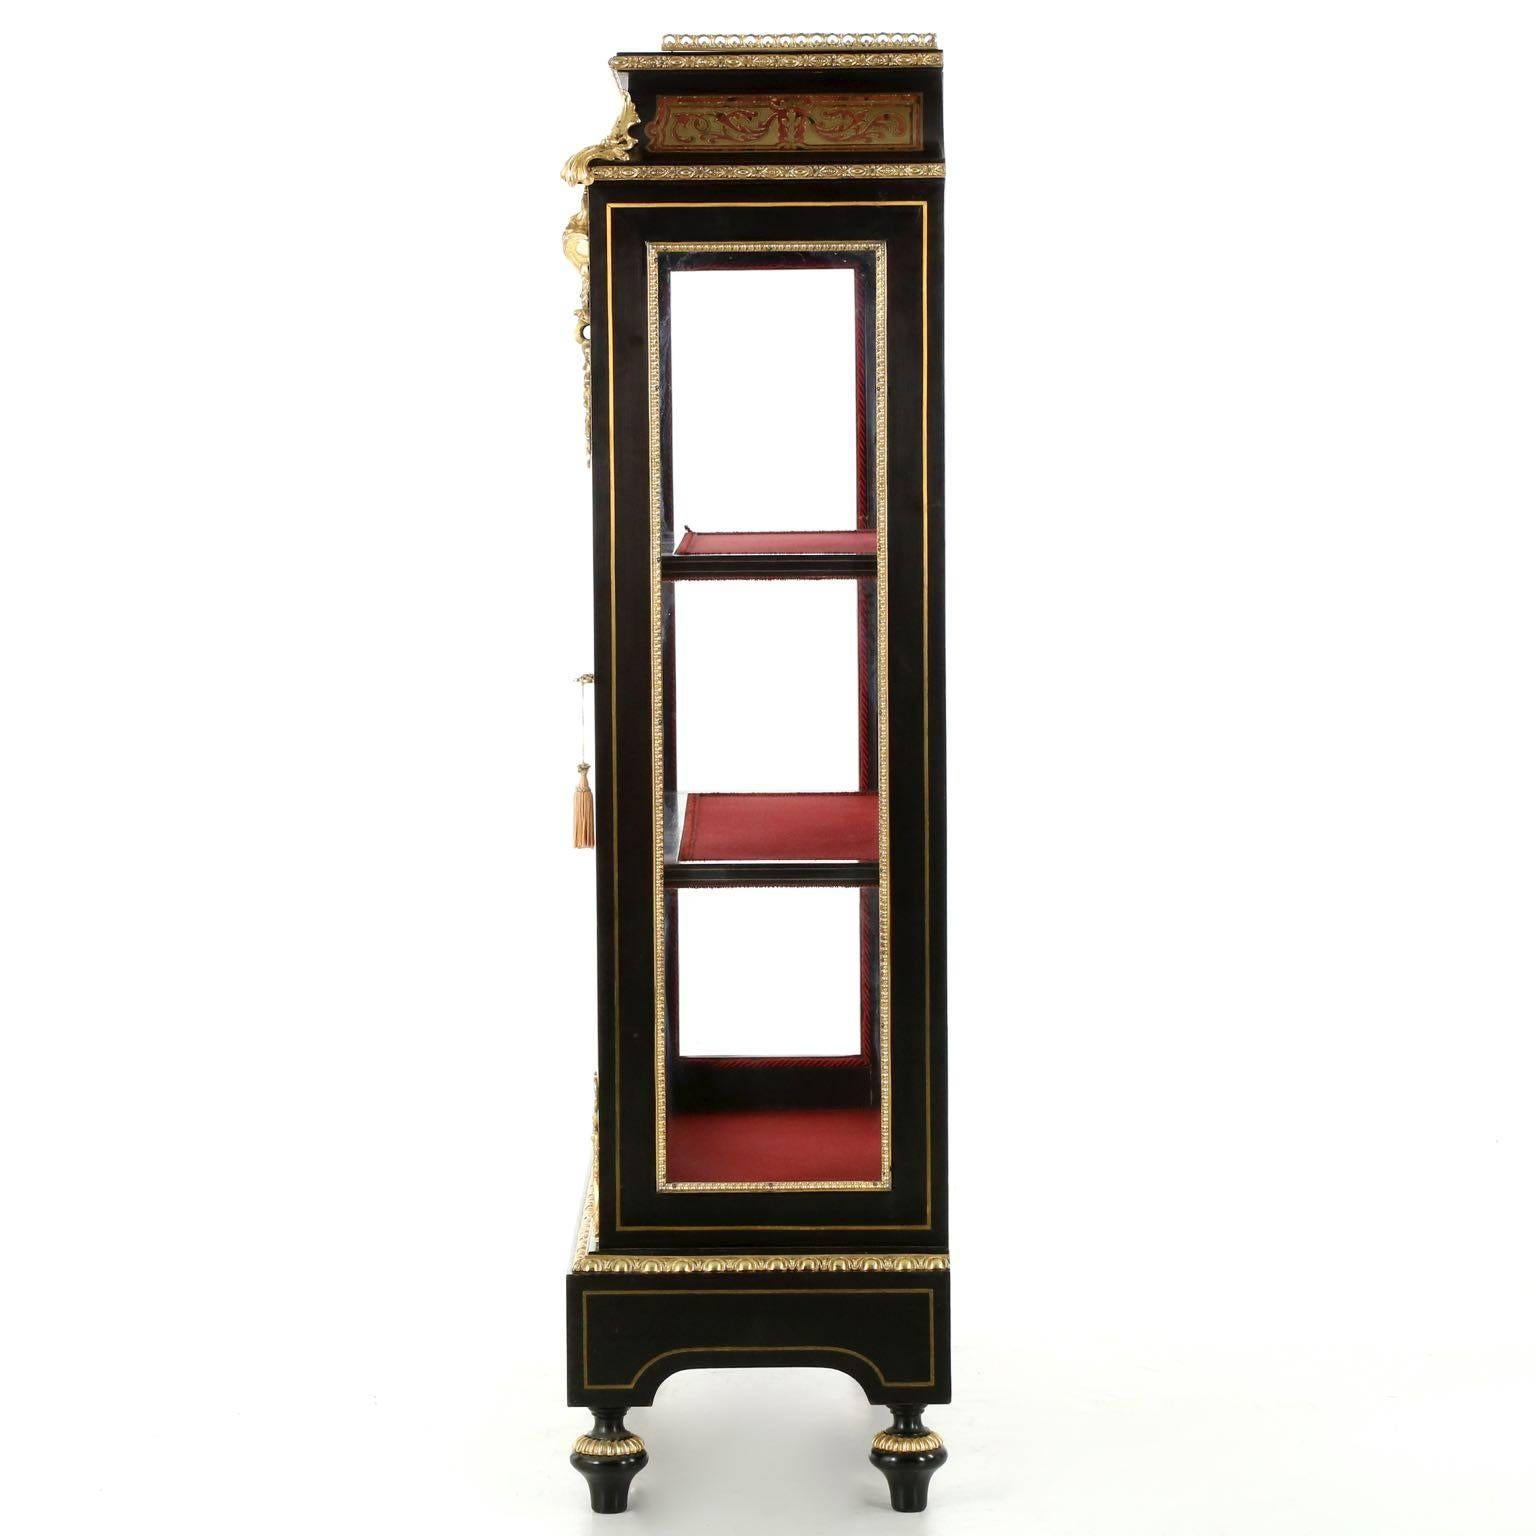 This 20th century reproduction is a perfect expression of the Napoleon III taste, exquisitely constructed with the finest materials for a powerful presentation. The deep and pure ebony surface is contrasted with brilliant displays of ormolu that